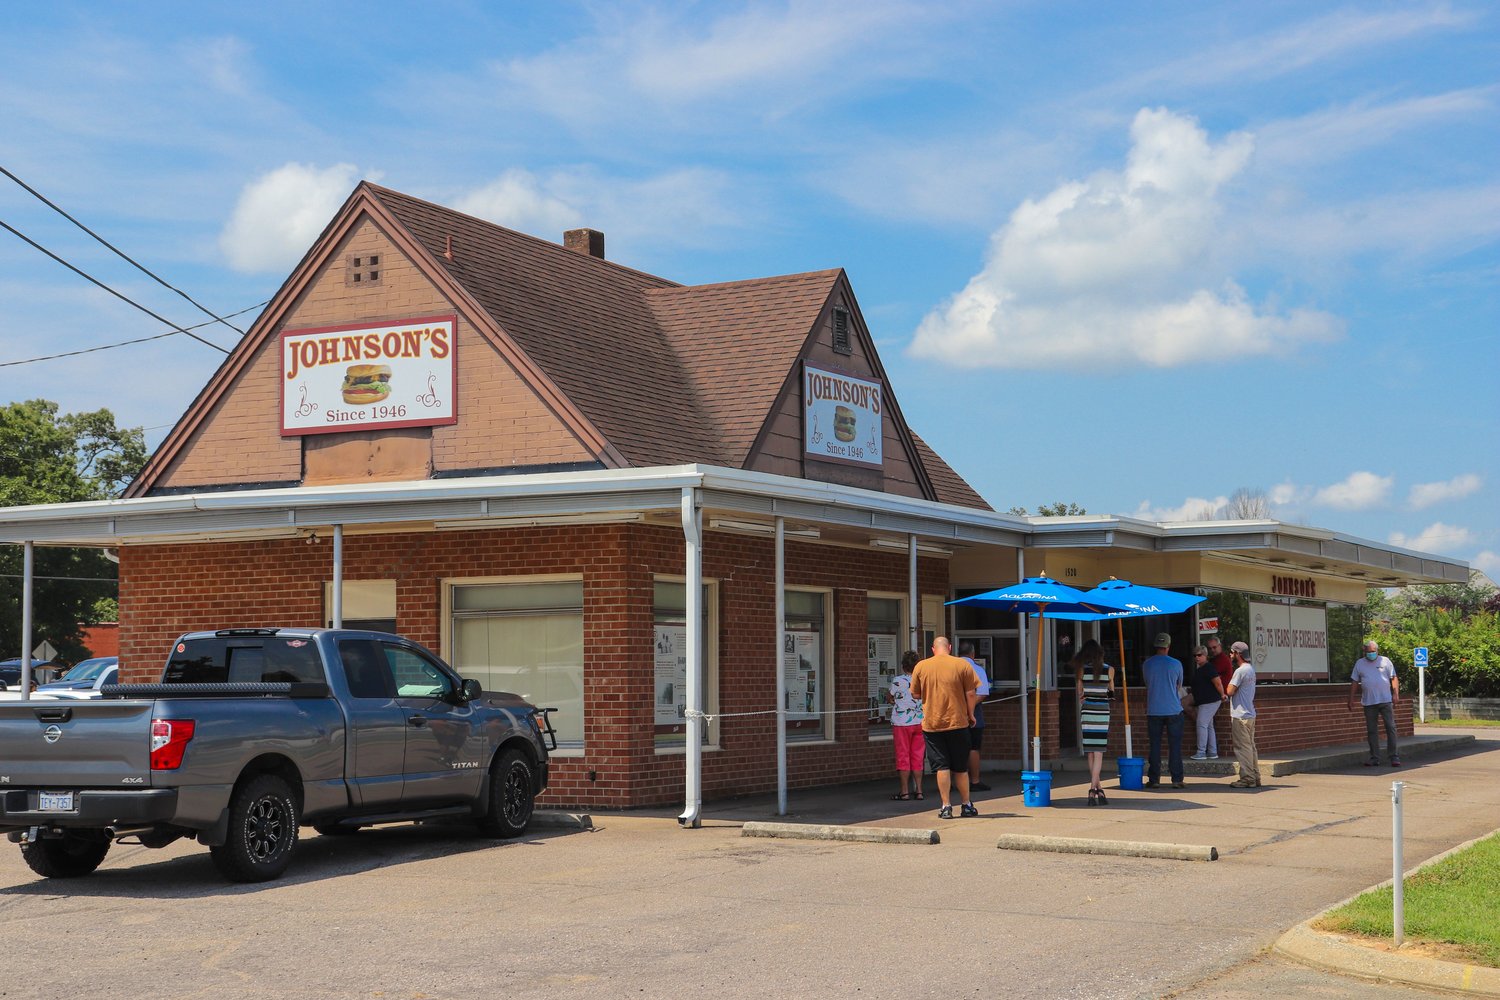 ‘We never based our business just on burgers. It’s based on quality; top quality meat cut and ground every day. When you order your burger, you know it’s getting fixed right then,' said Carolyn Routh, Johnson’s Drive-In manager.